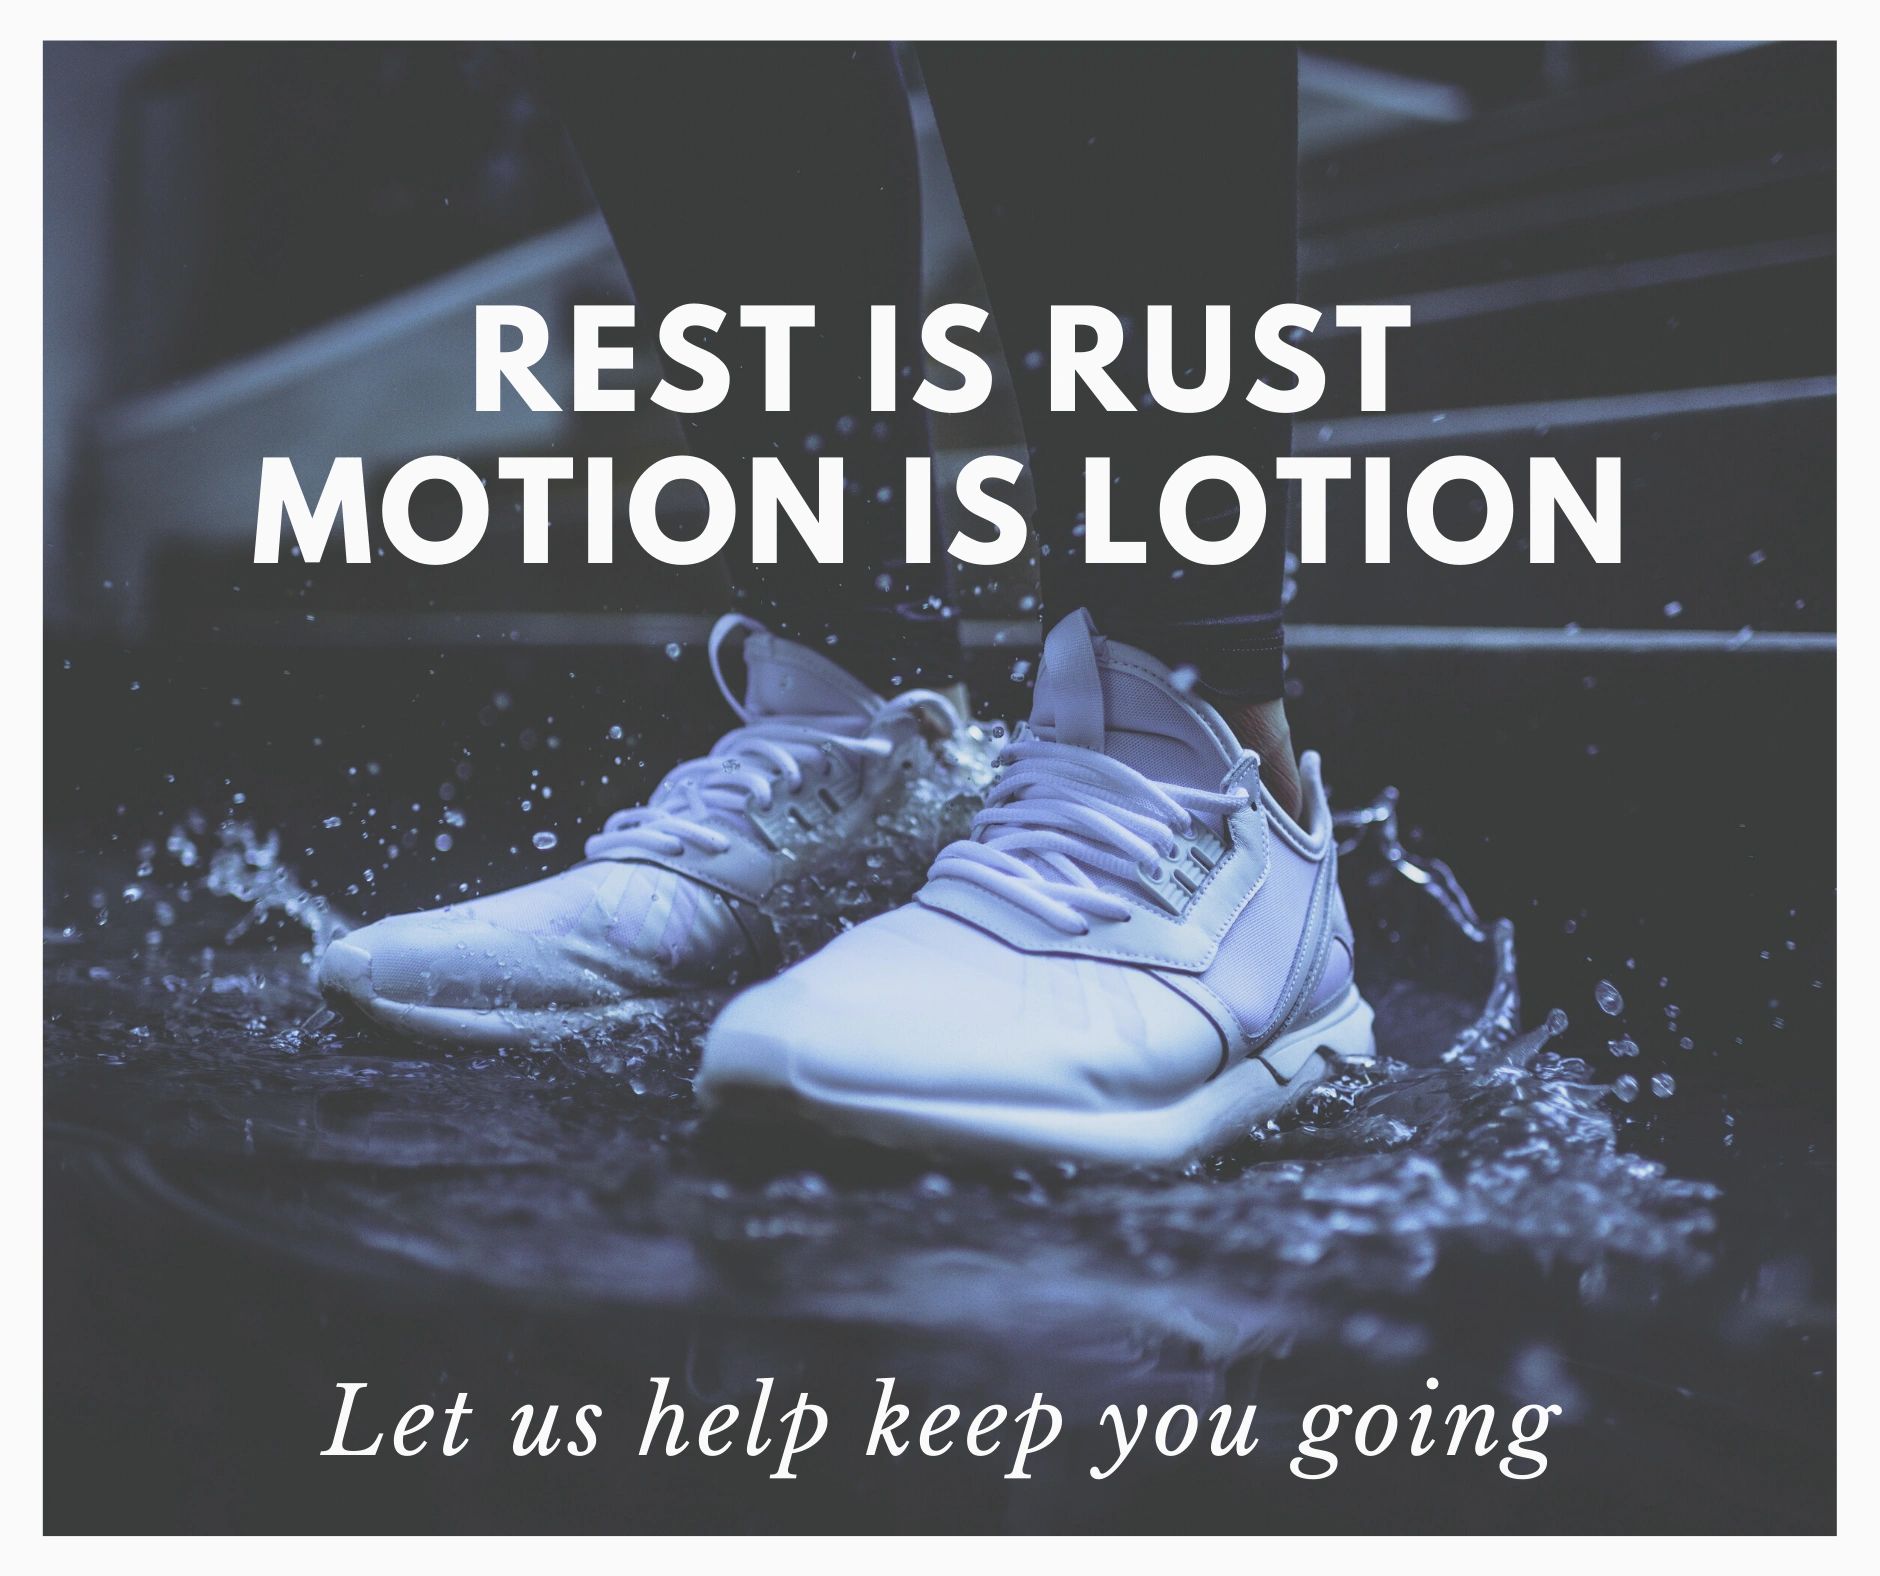 Rest is rust, motion is lotion